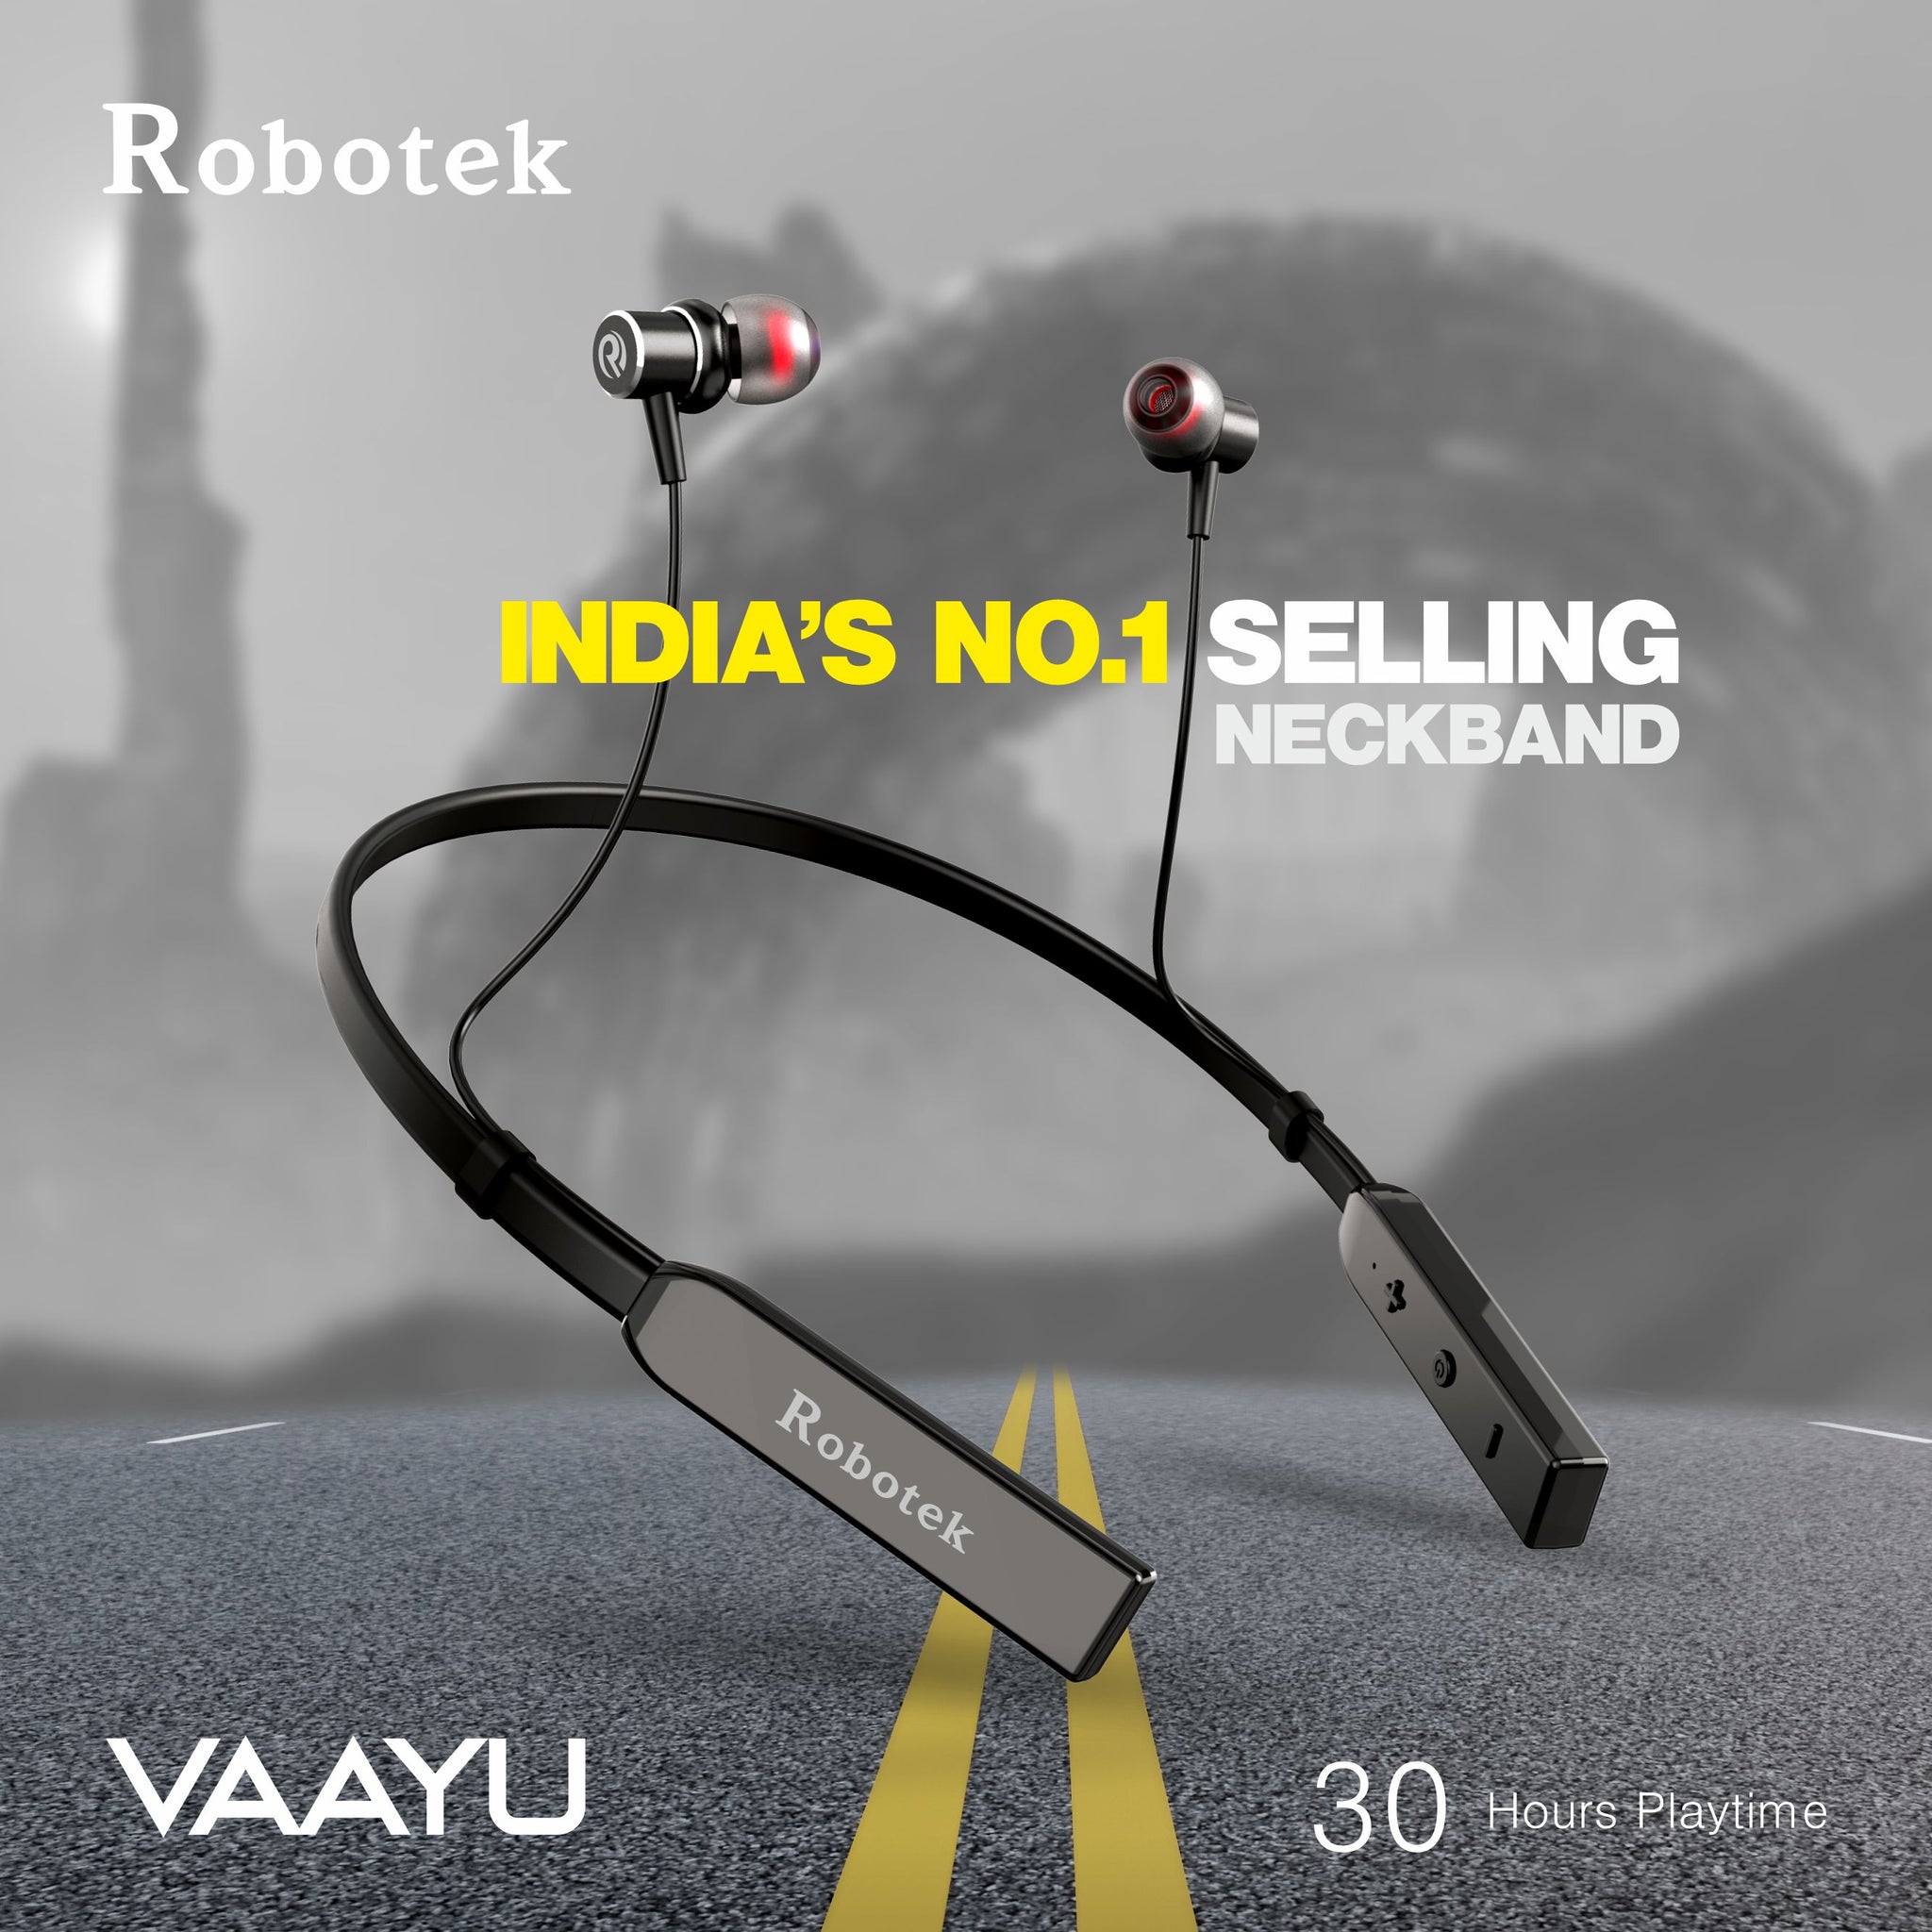 Vaayu Neckband with Bluetooth 5.2 Wireless in Ear Headphones, 13mm Driver, Upto 30Hr Playback Deep Bass, HD Calls, Fast Charging Type-C Neckband, Magnetic Buds, IPX5 Water Resistant & SweatProof